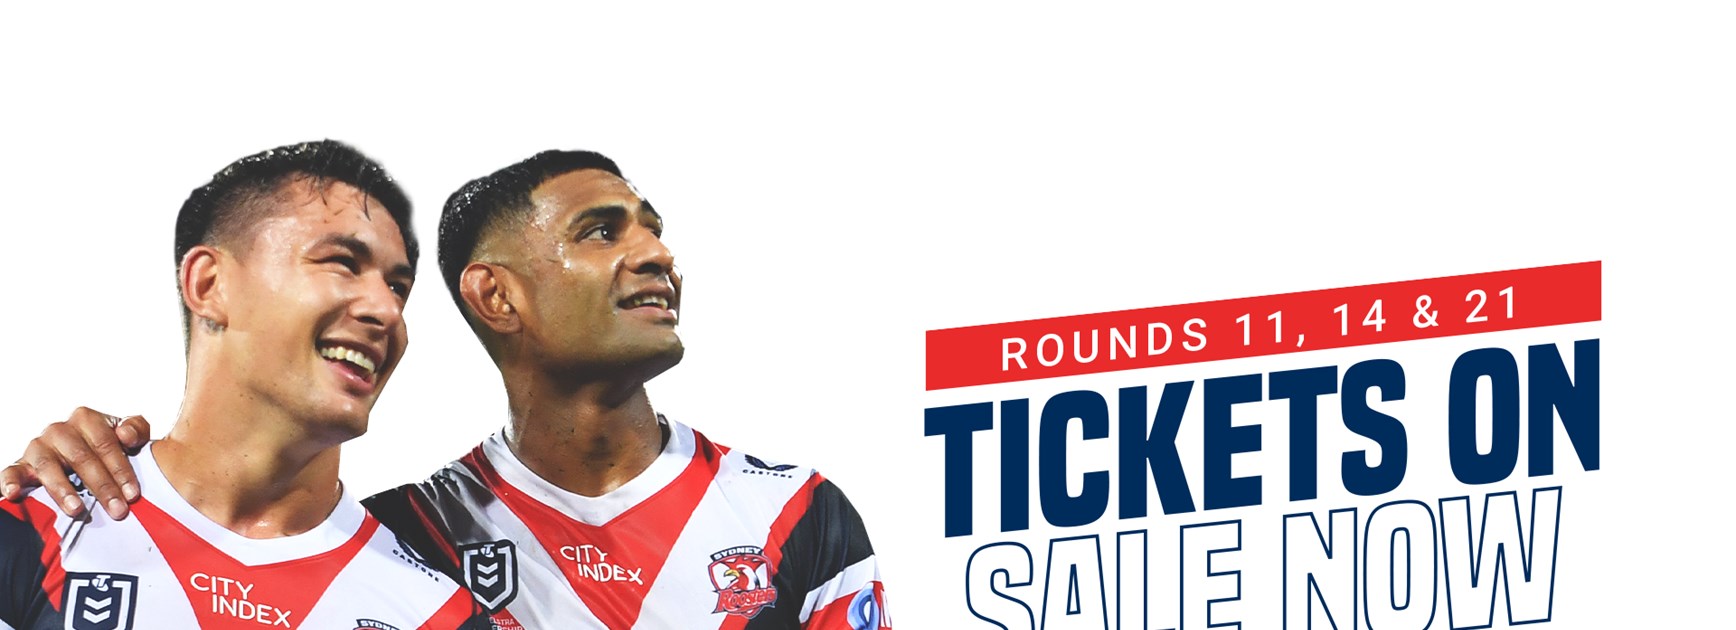 Tickets for Round 11, 14 and 21 On Sale Now!